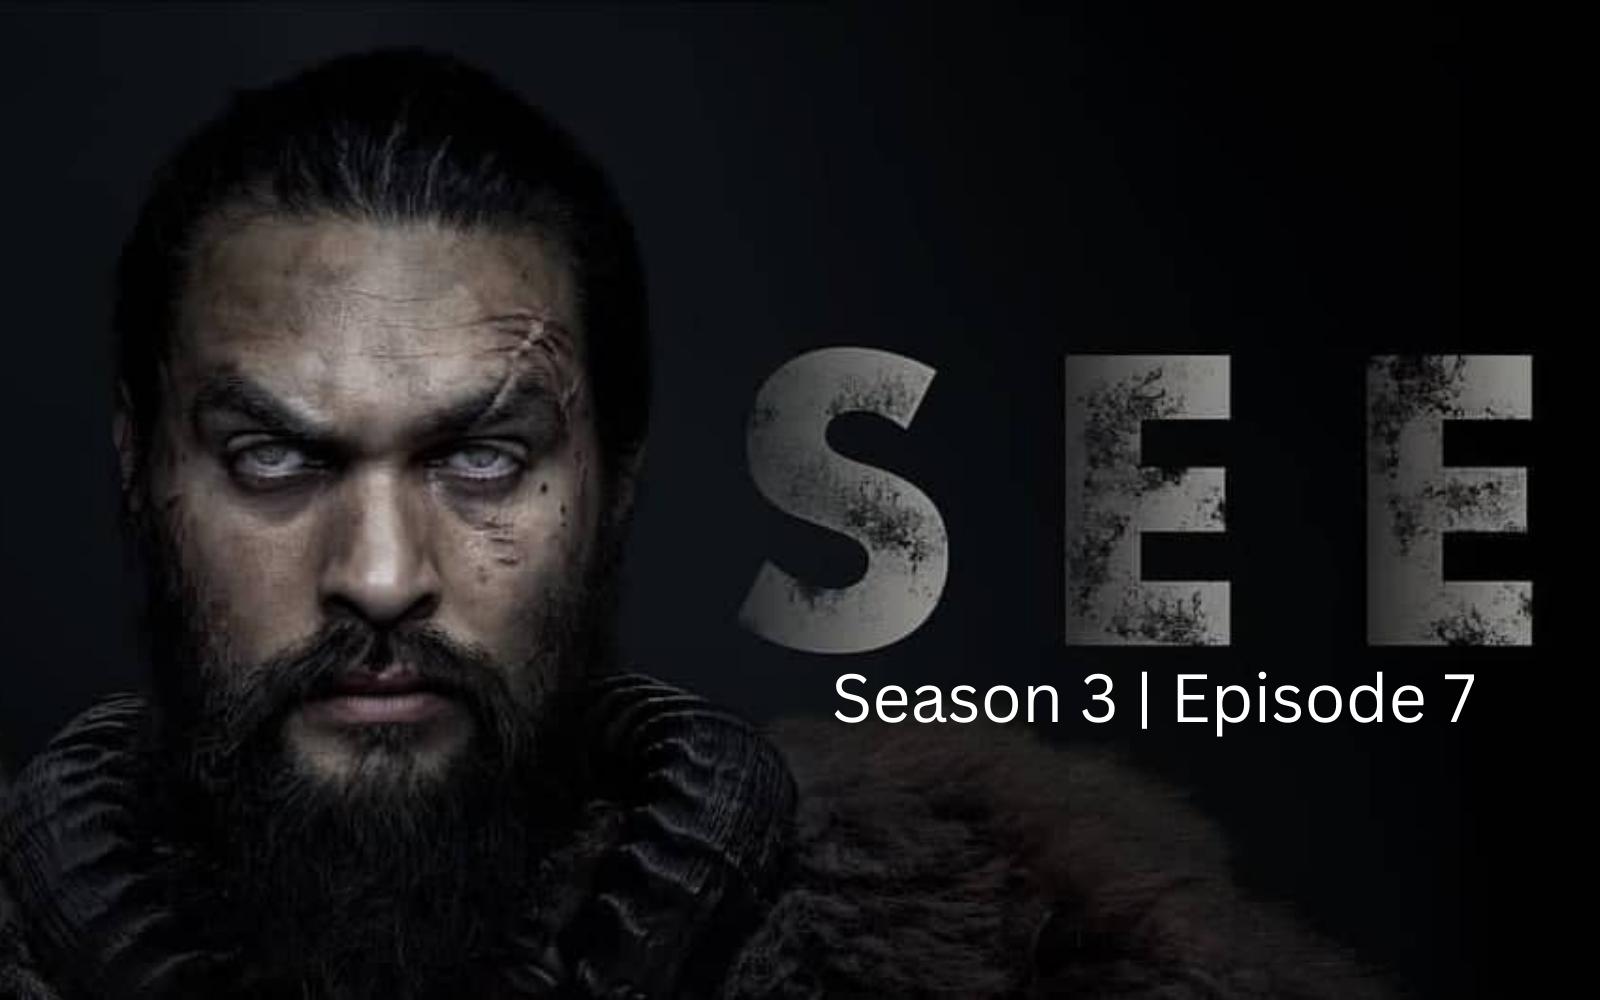 See Season 3 Episode 7 : Release Date, Release Time, Countdown, Spoiler, Teaser & Reviews